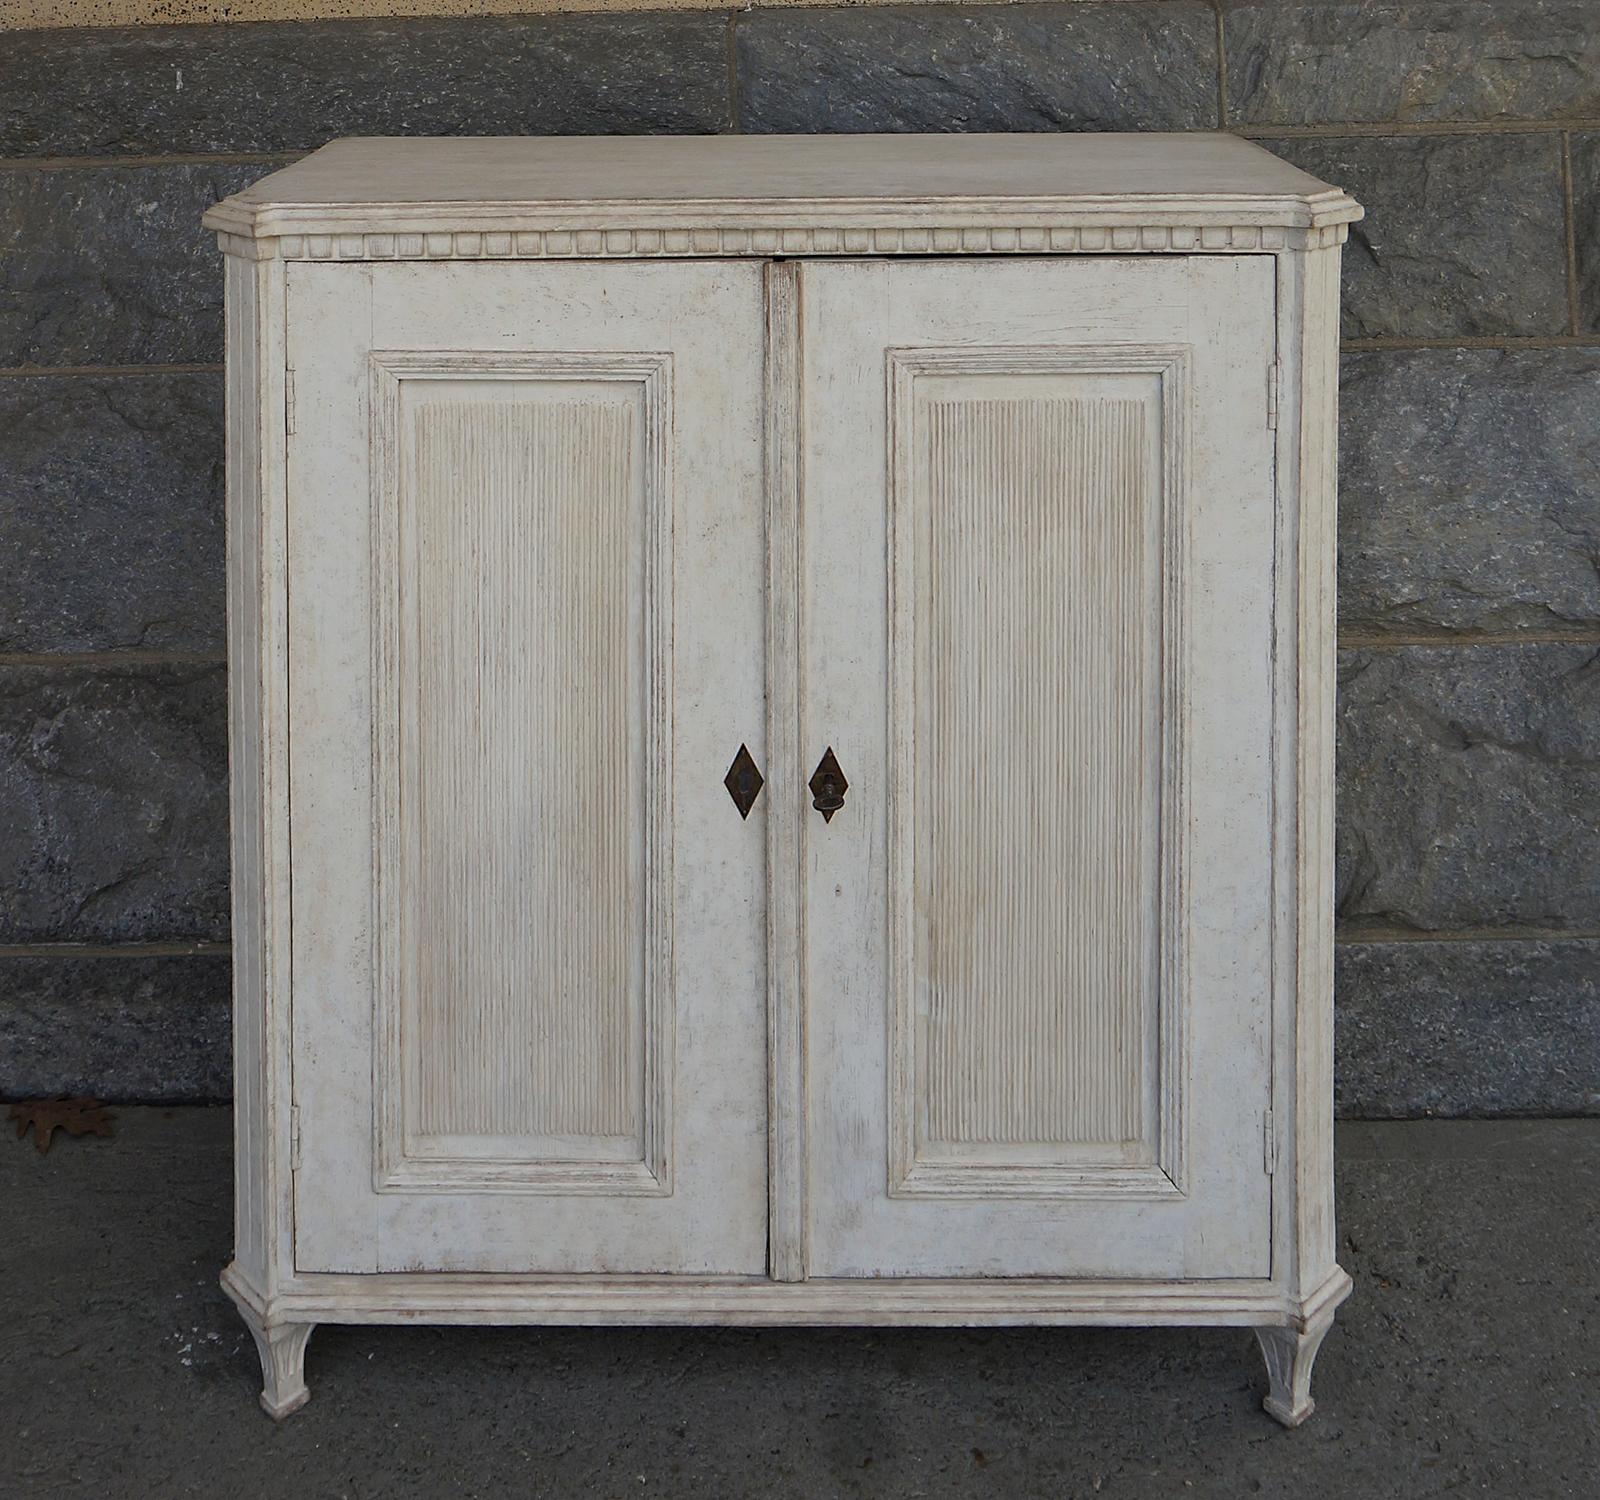 Gustavian style sideboard, Sweden, circa 1850, having a shaped top with dentil molding over double doors with fluted panels, the canted corner posts are supported by tapering square legs and decorated with incised detail. The interior has two fixed